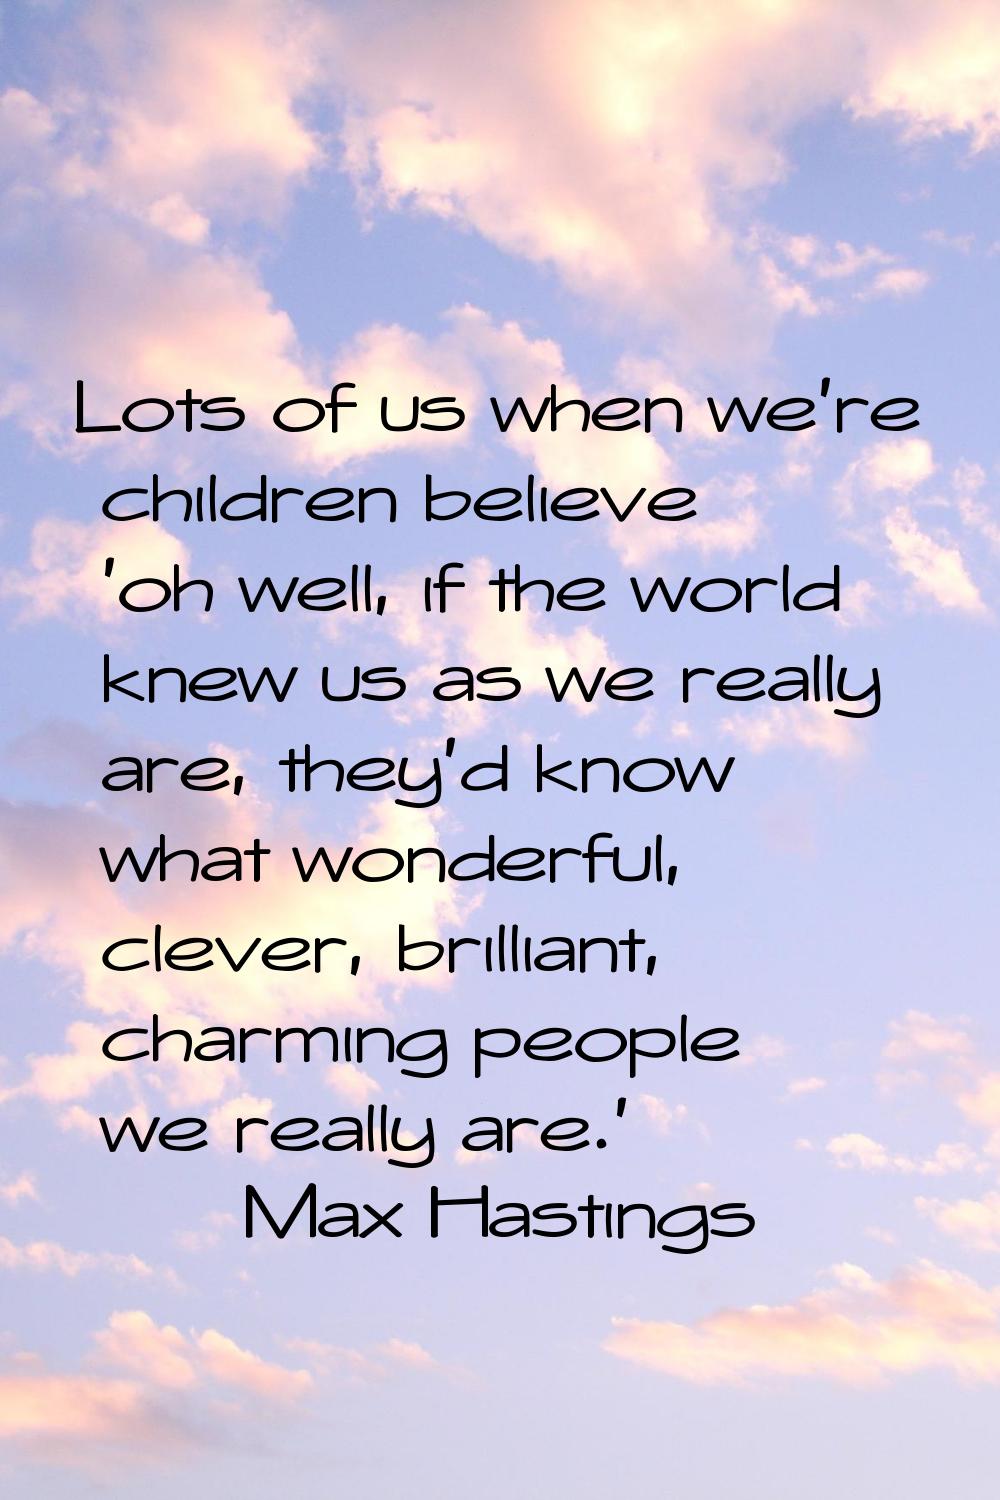 Lots of us when we're children believe 'oh well, if the world knew us as we really are, they'd know